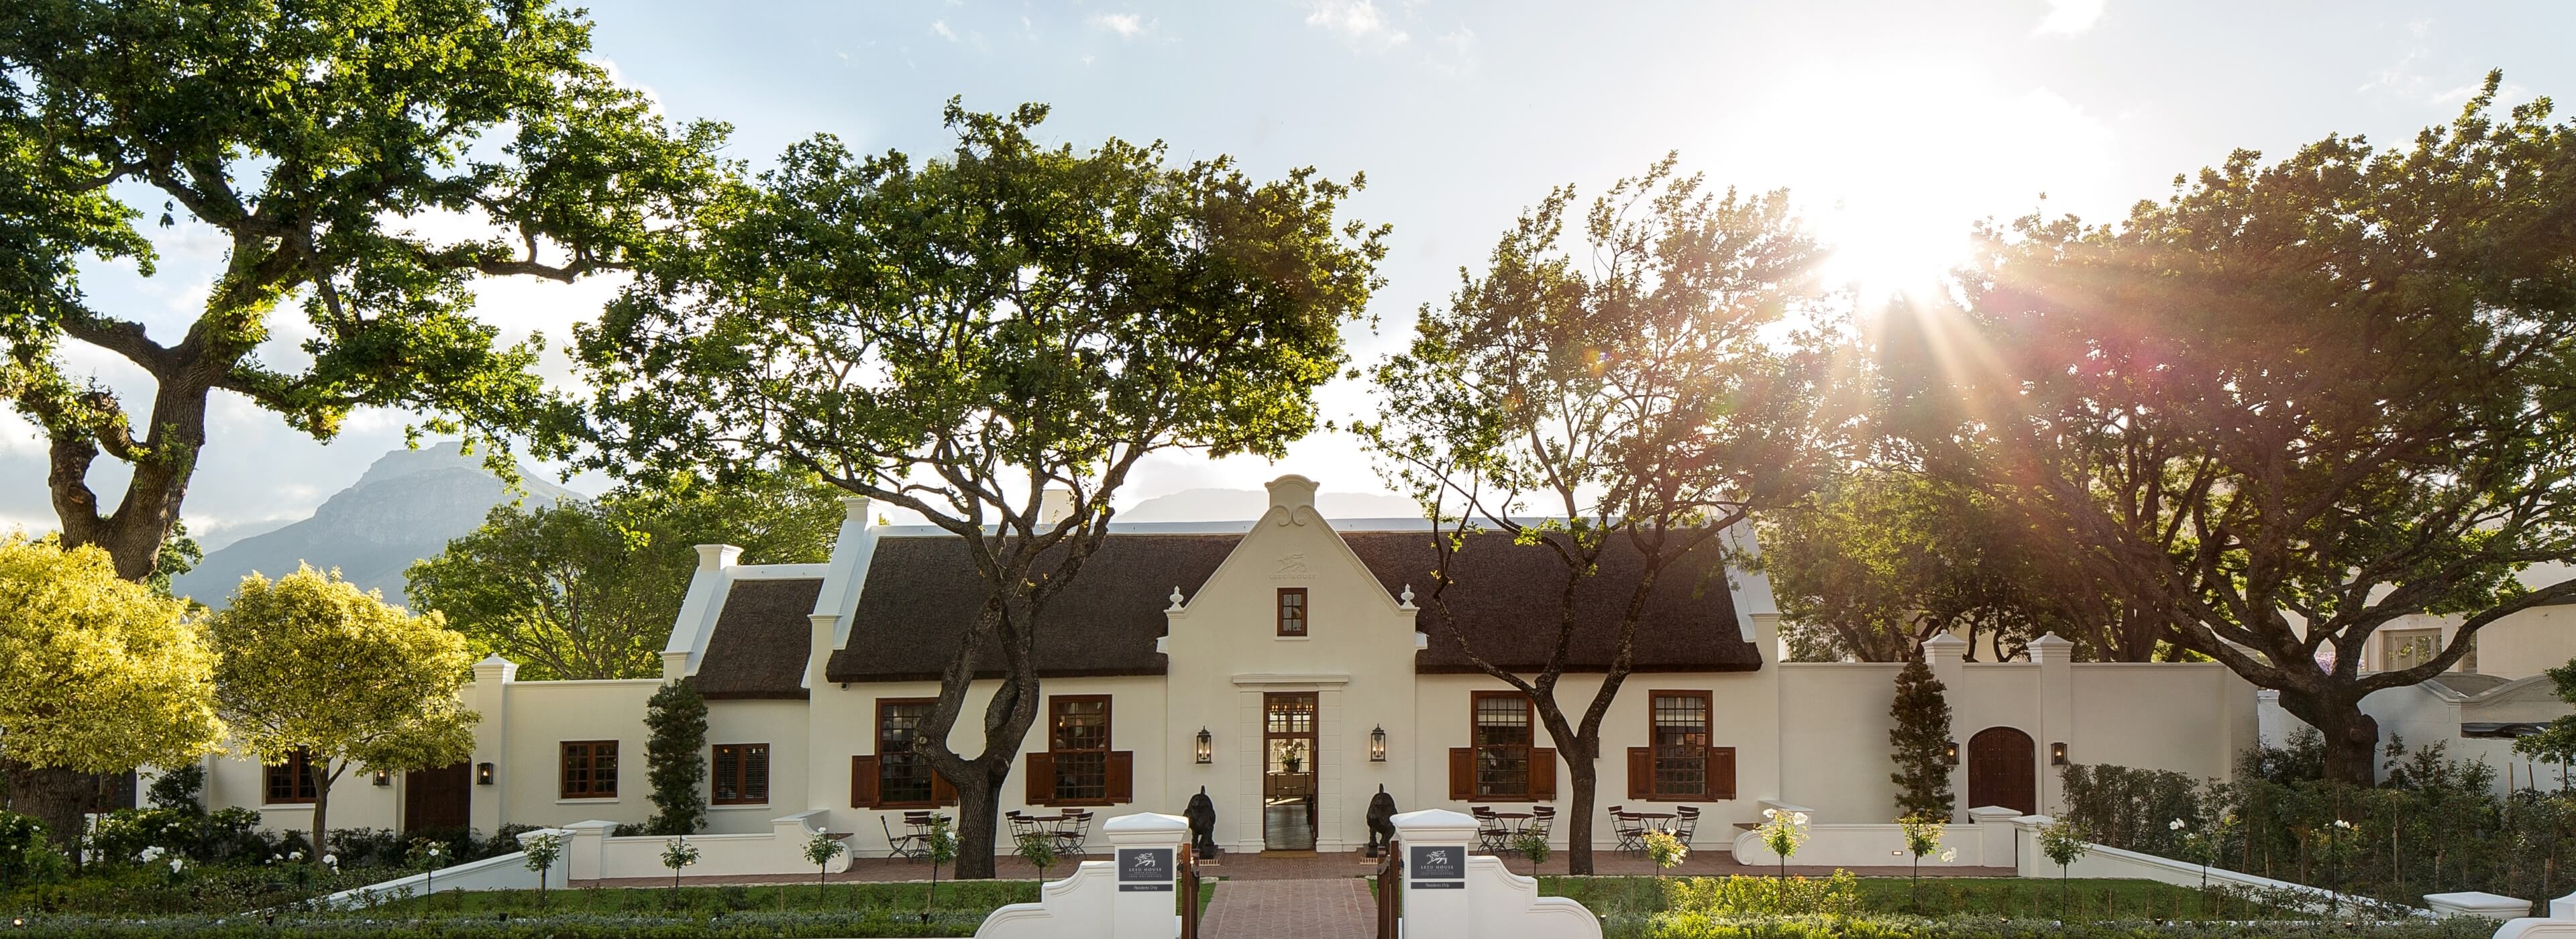 Leeu Collection | South Africa | OFFERS & EXPERIENCES Leeu Collection Gift Vouchers